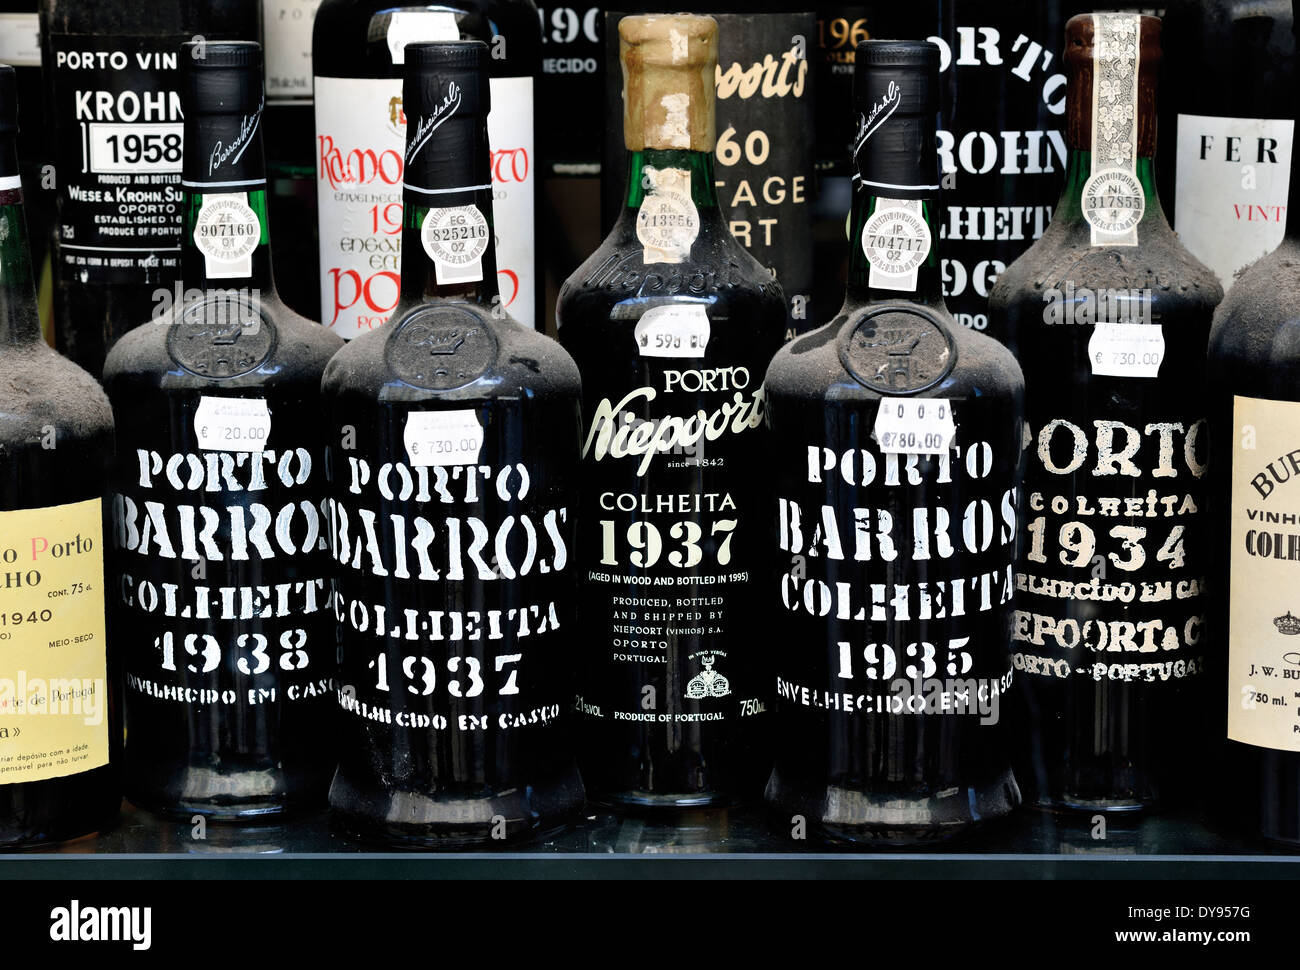 Portugal, Lisbon: Vintage port wine bottles in the window of a traditional shop Stock Photo